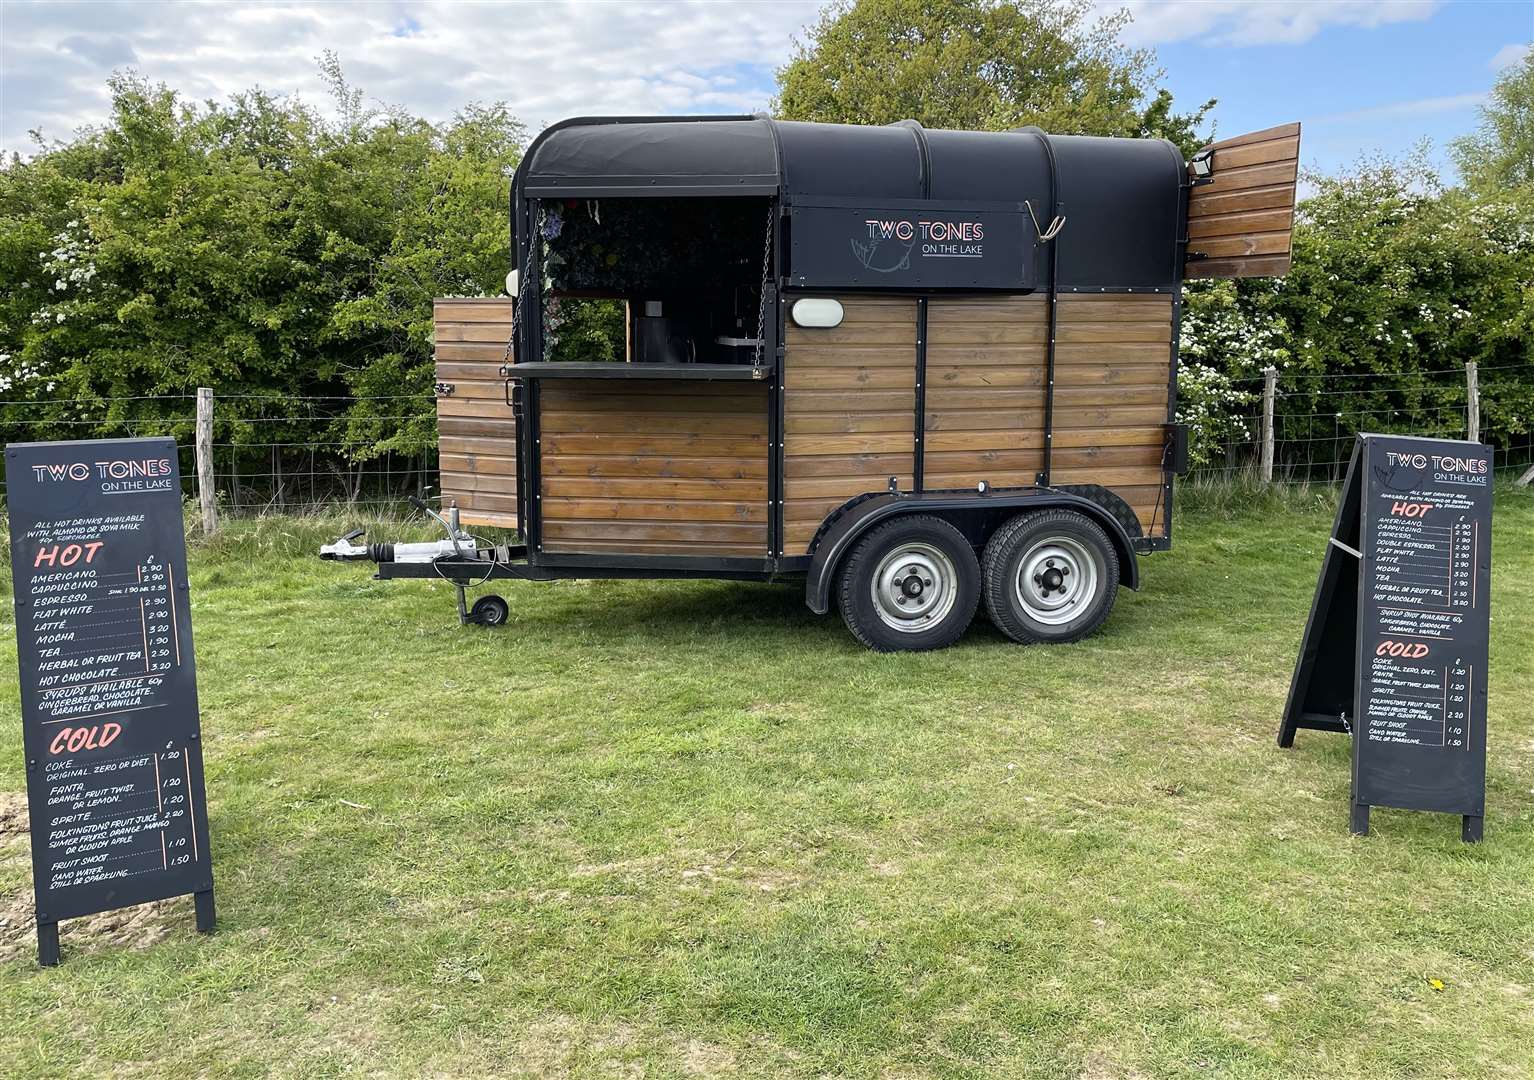 Coffee will be served from a converted horsebox